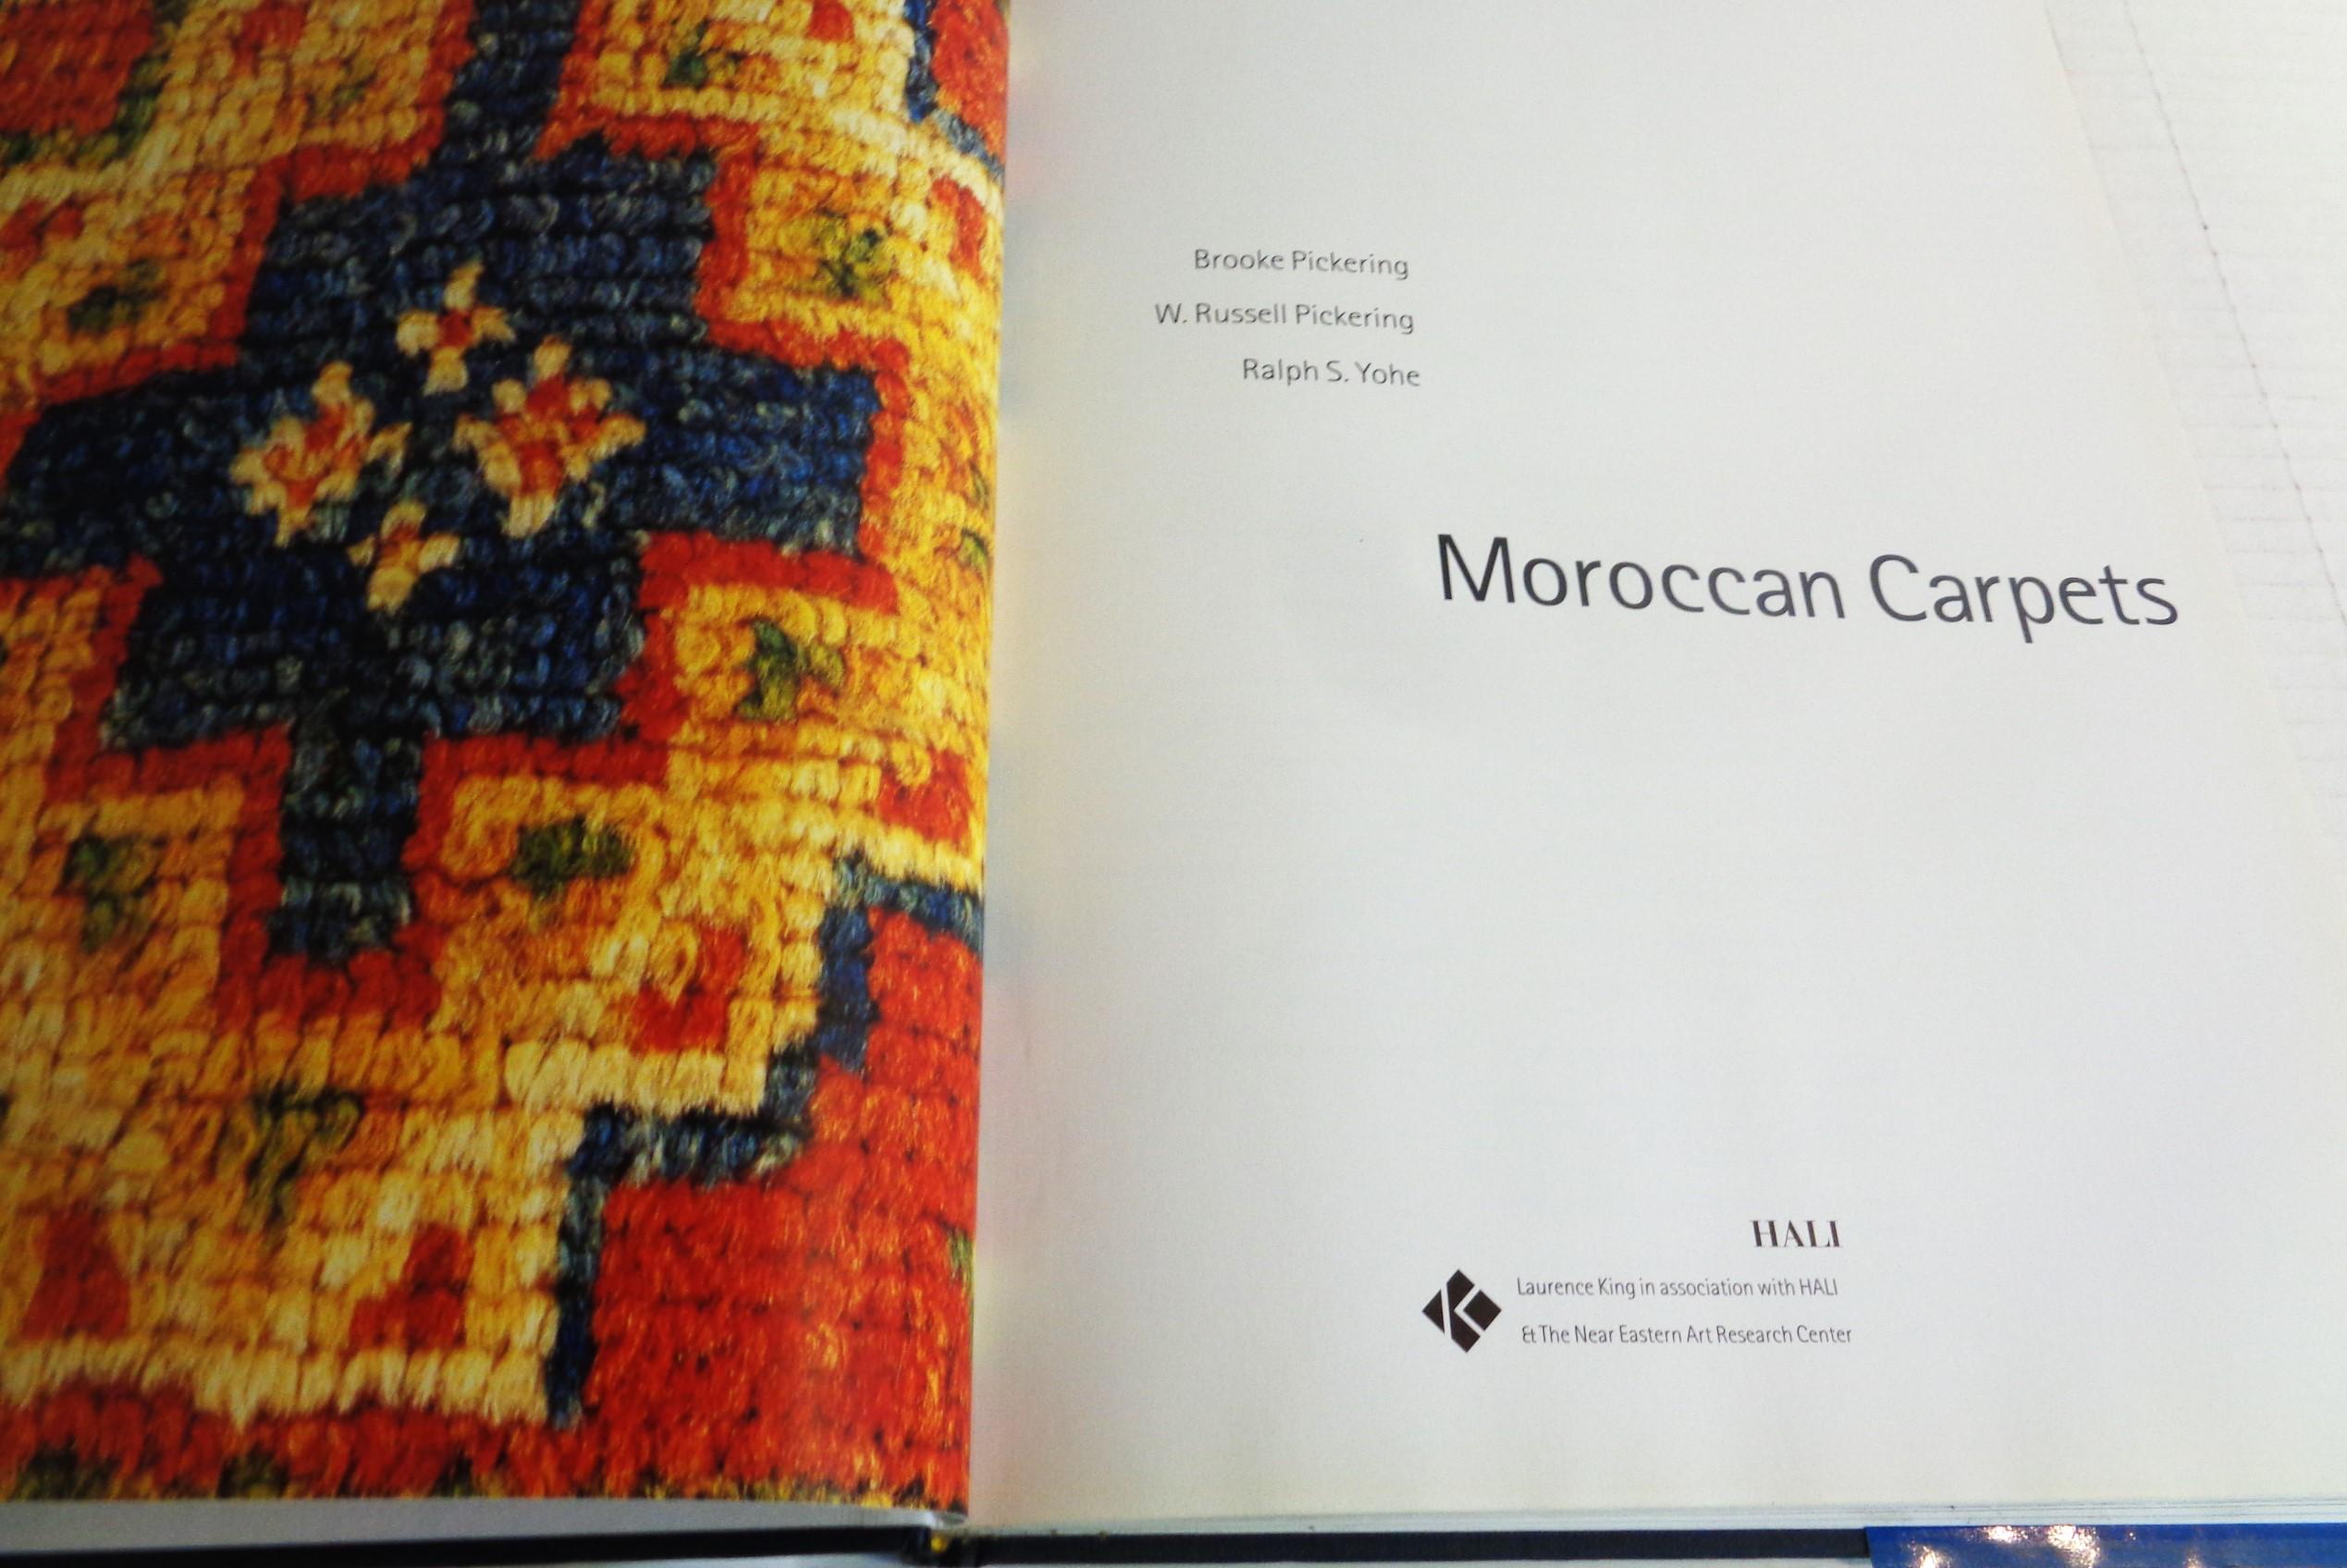 Late 20th Century  Moroccan Carpets: Pickering, Pickering, Yohe - Laurence King Hali Publications For Sale